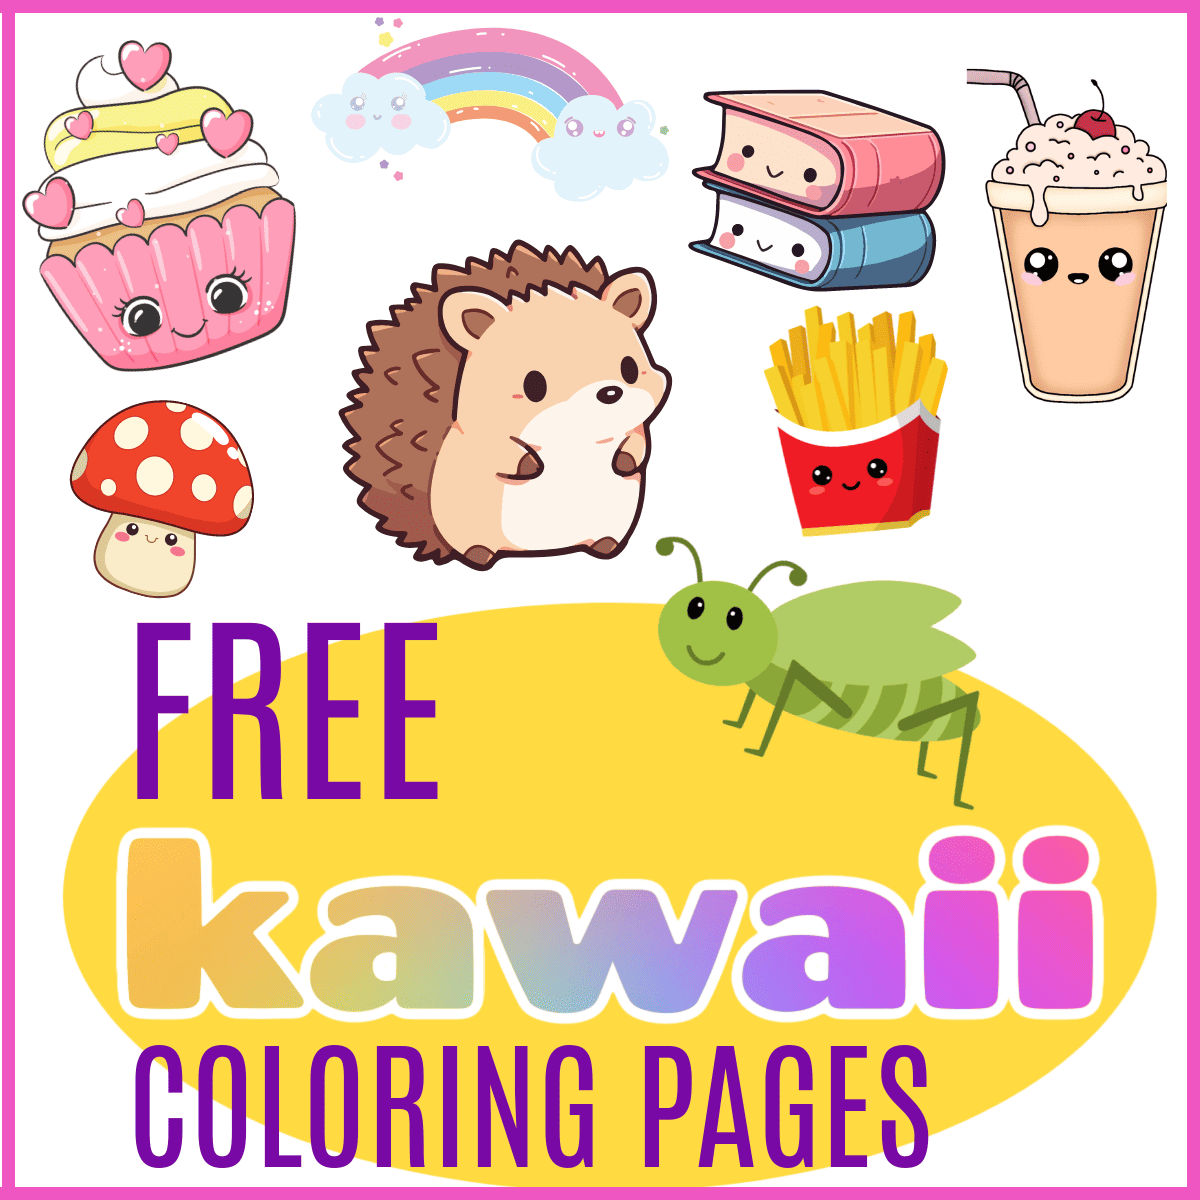 brightly colored kawaii style images with pink border and colorful text title.